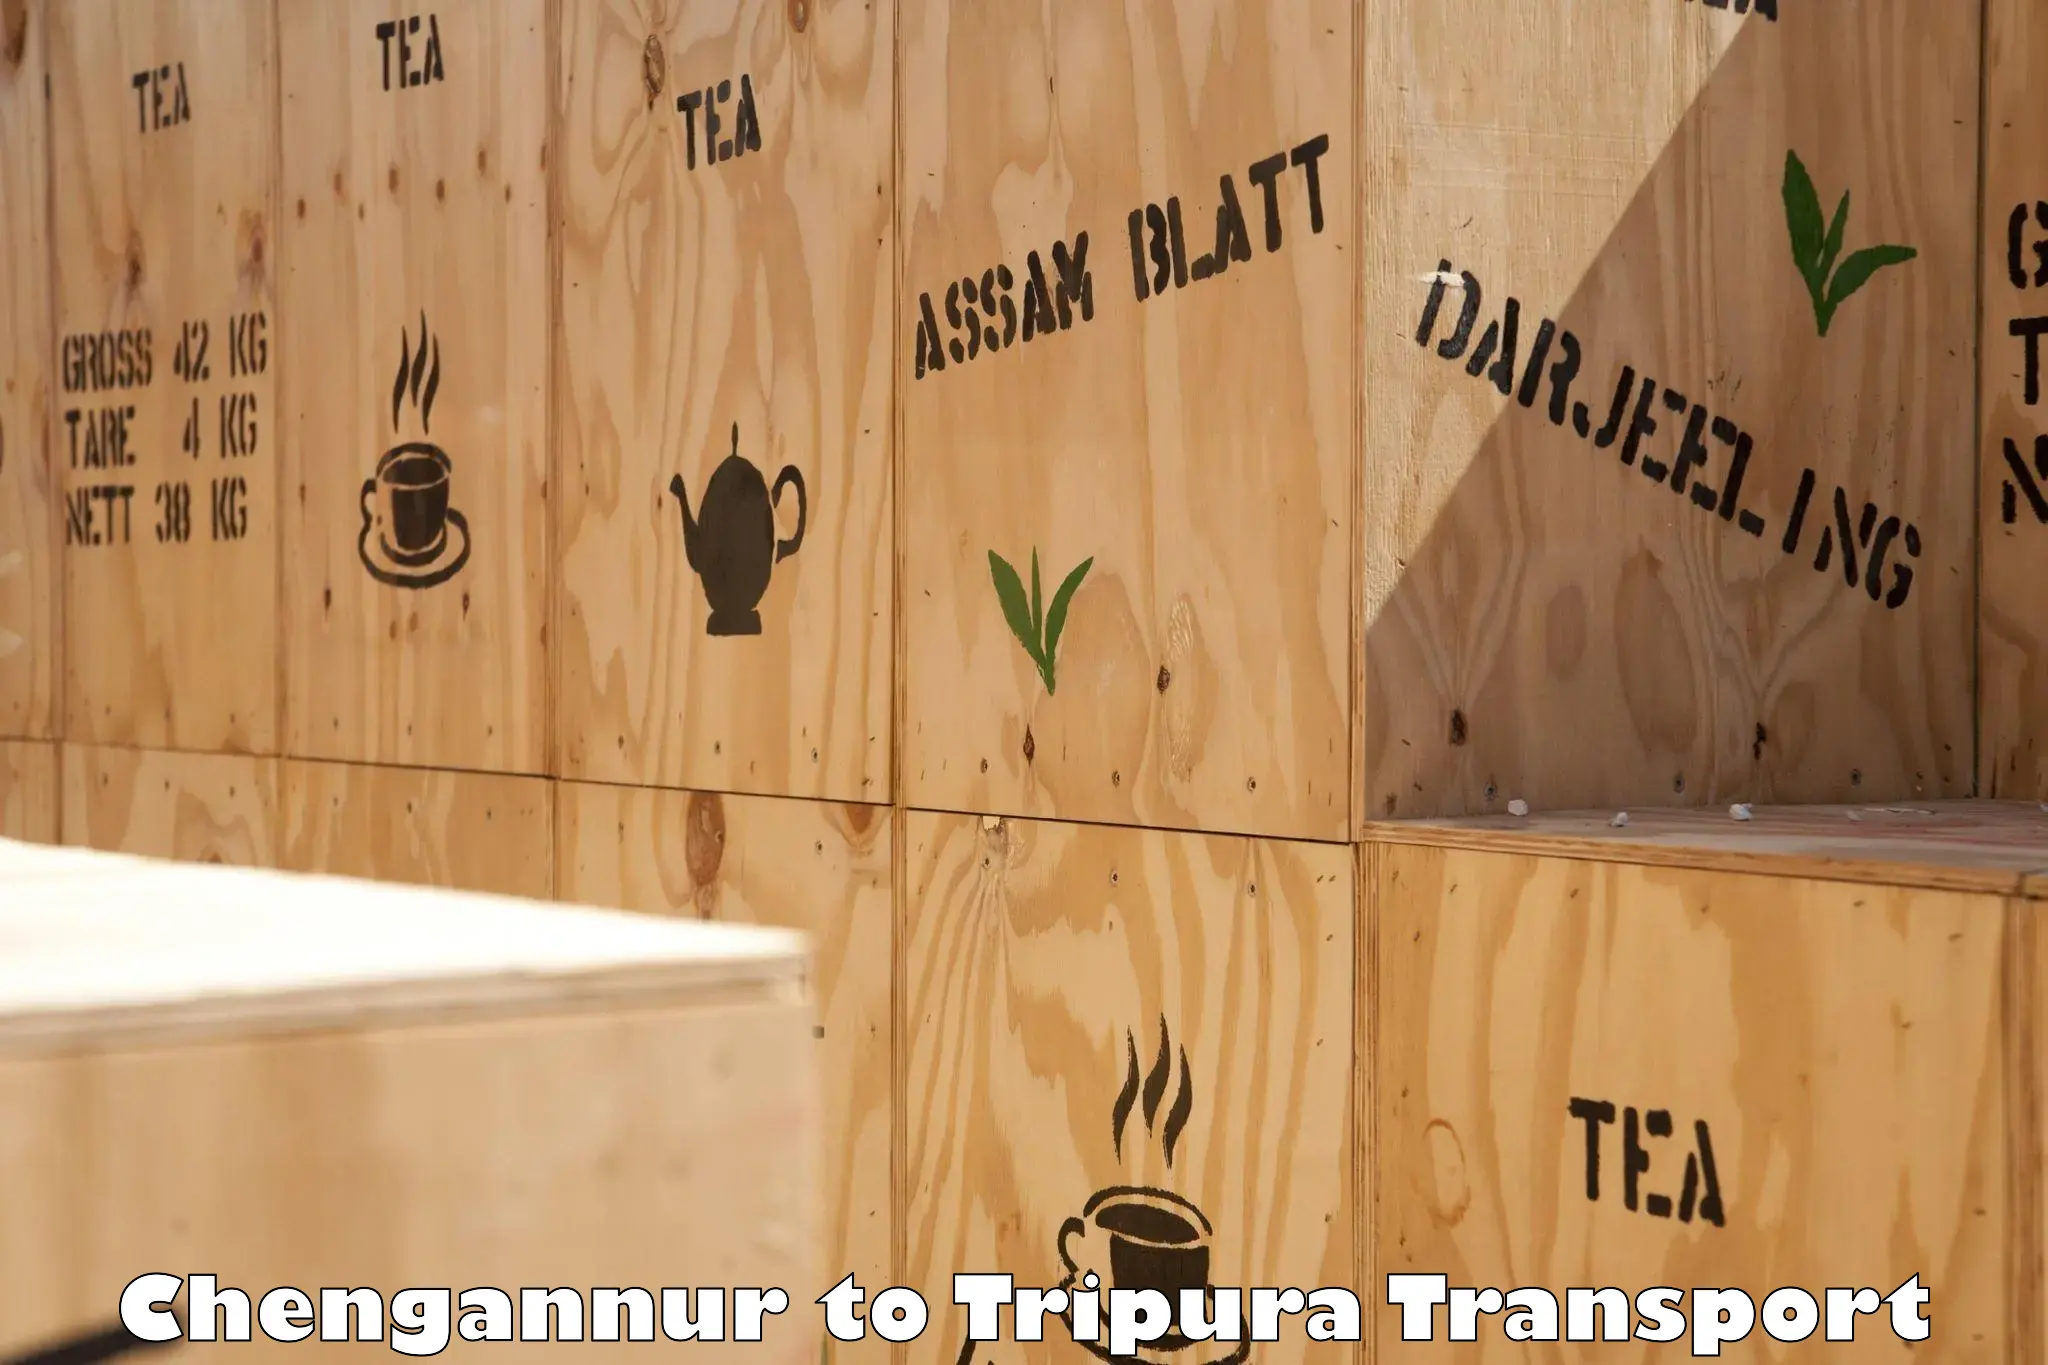 Express transport services Chengannur to Udaipur Tripura